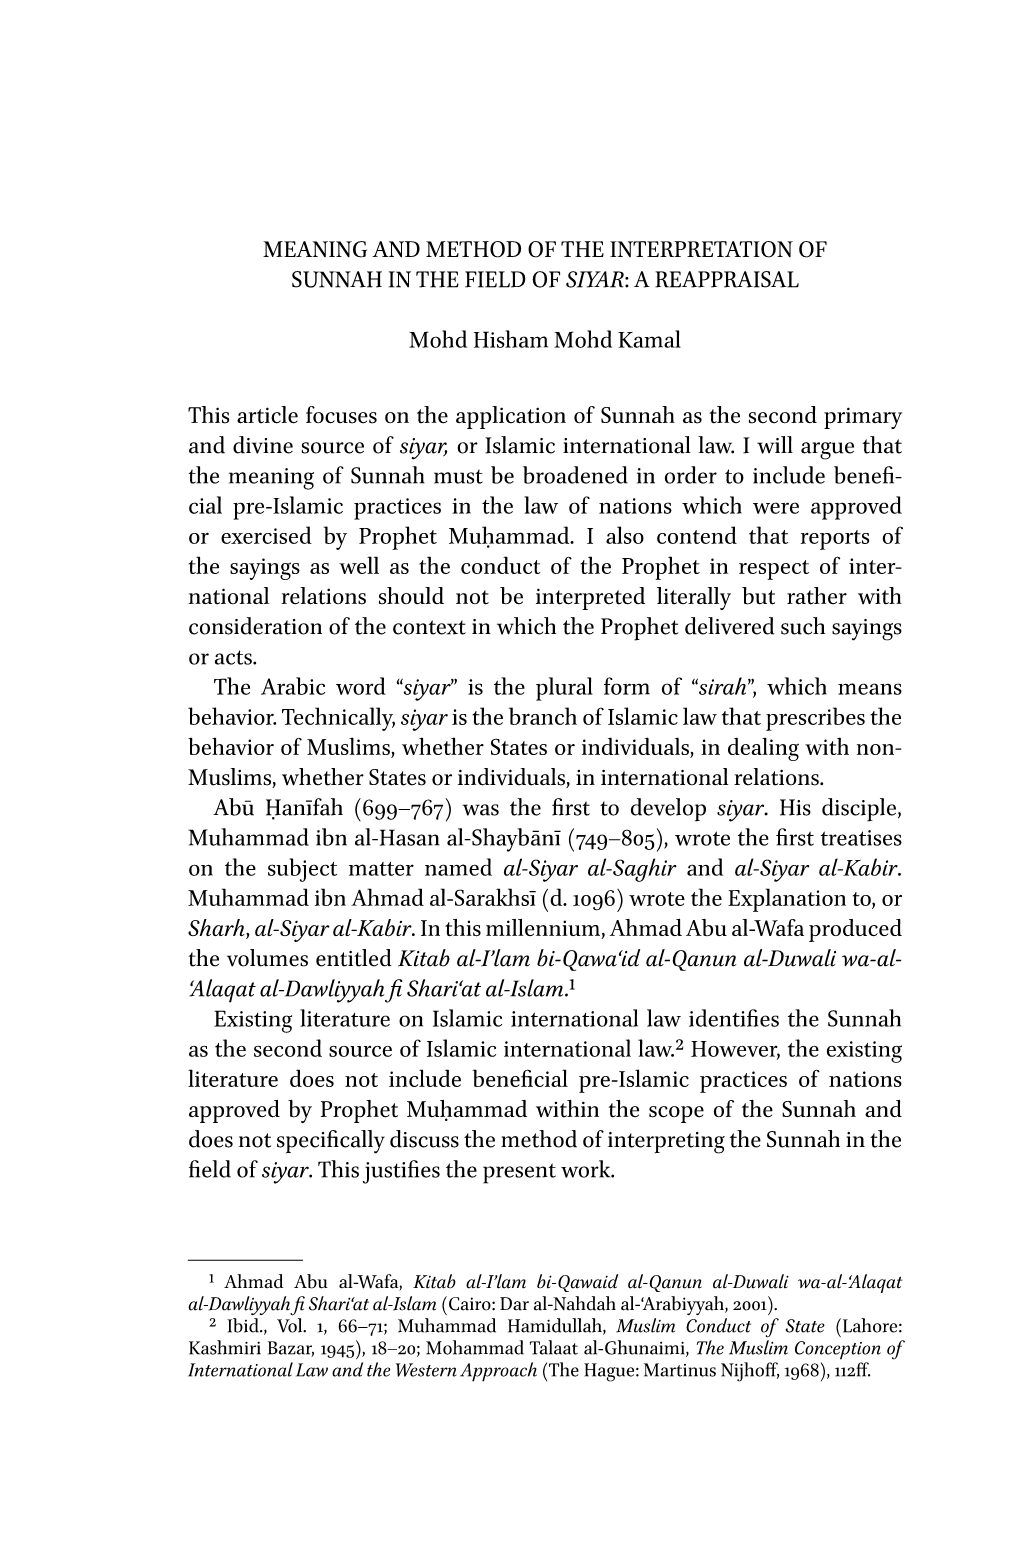 Meaning and Method of the Interpretation of Sunnah in the Field of Siyar: a Reappraisal